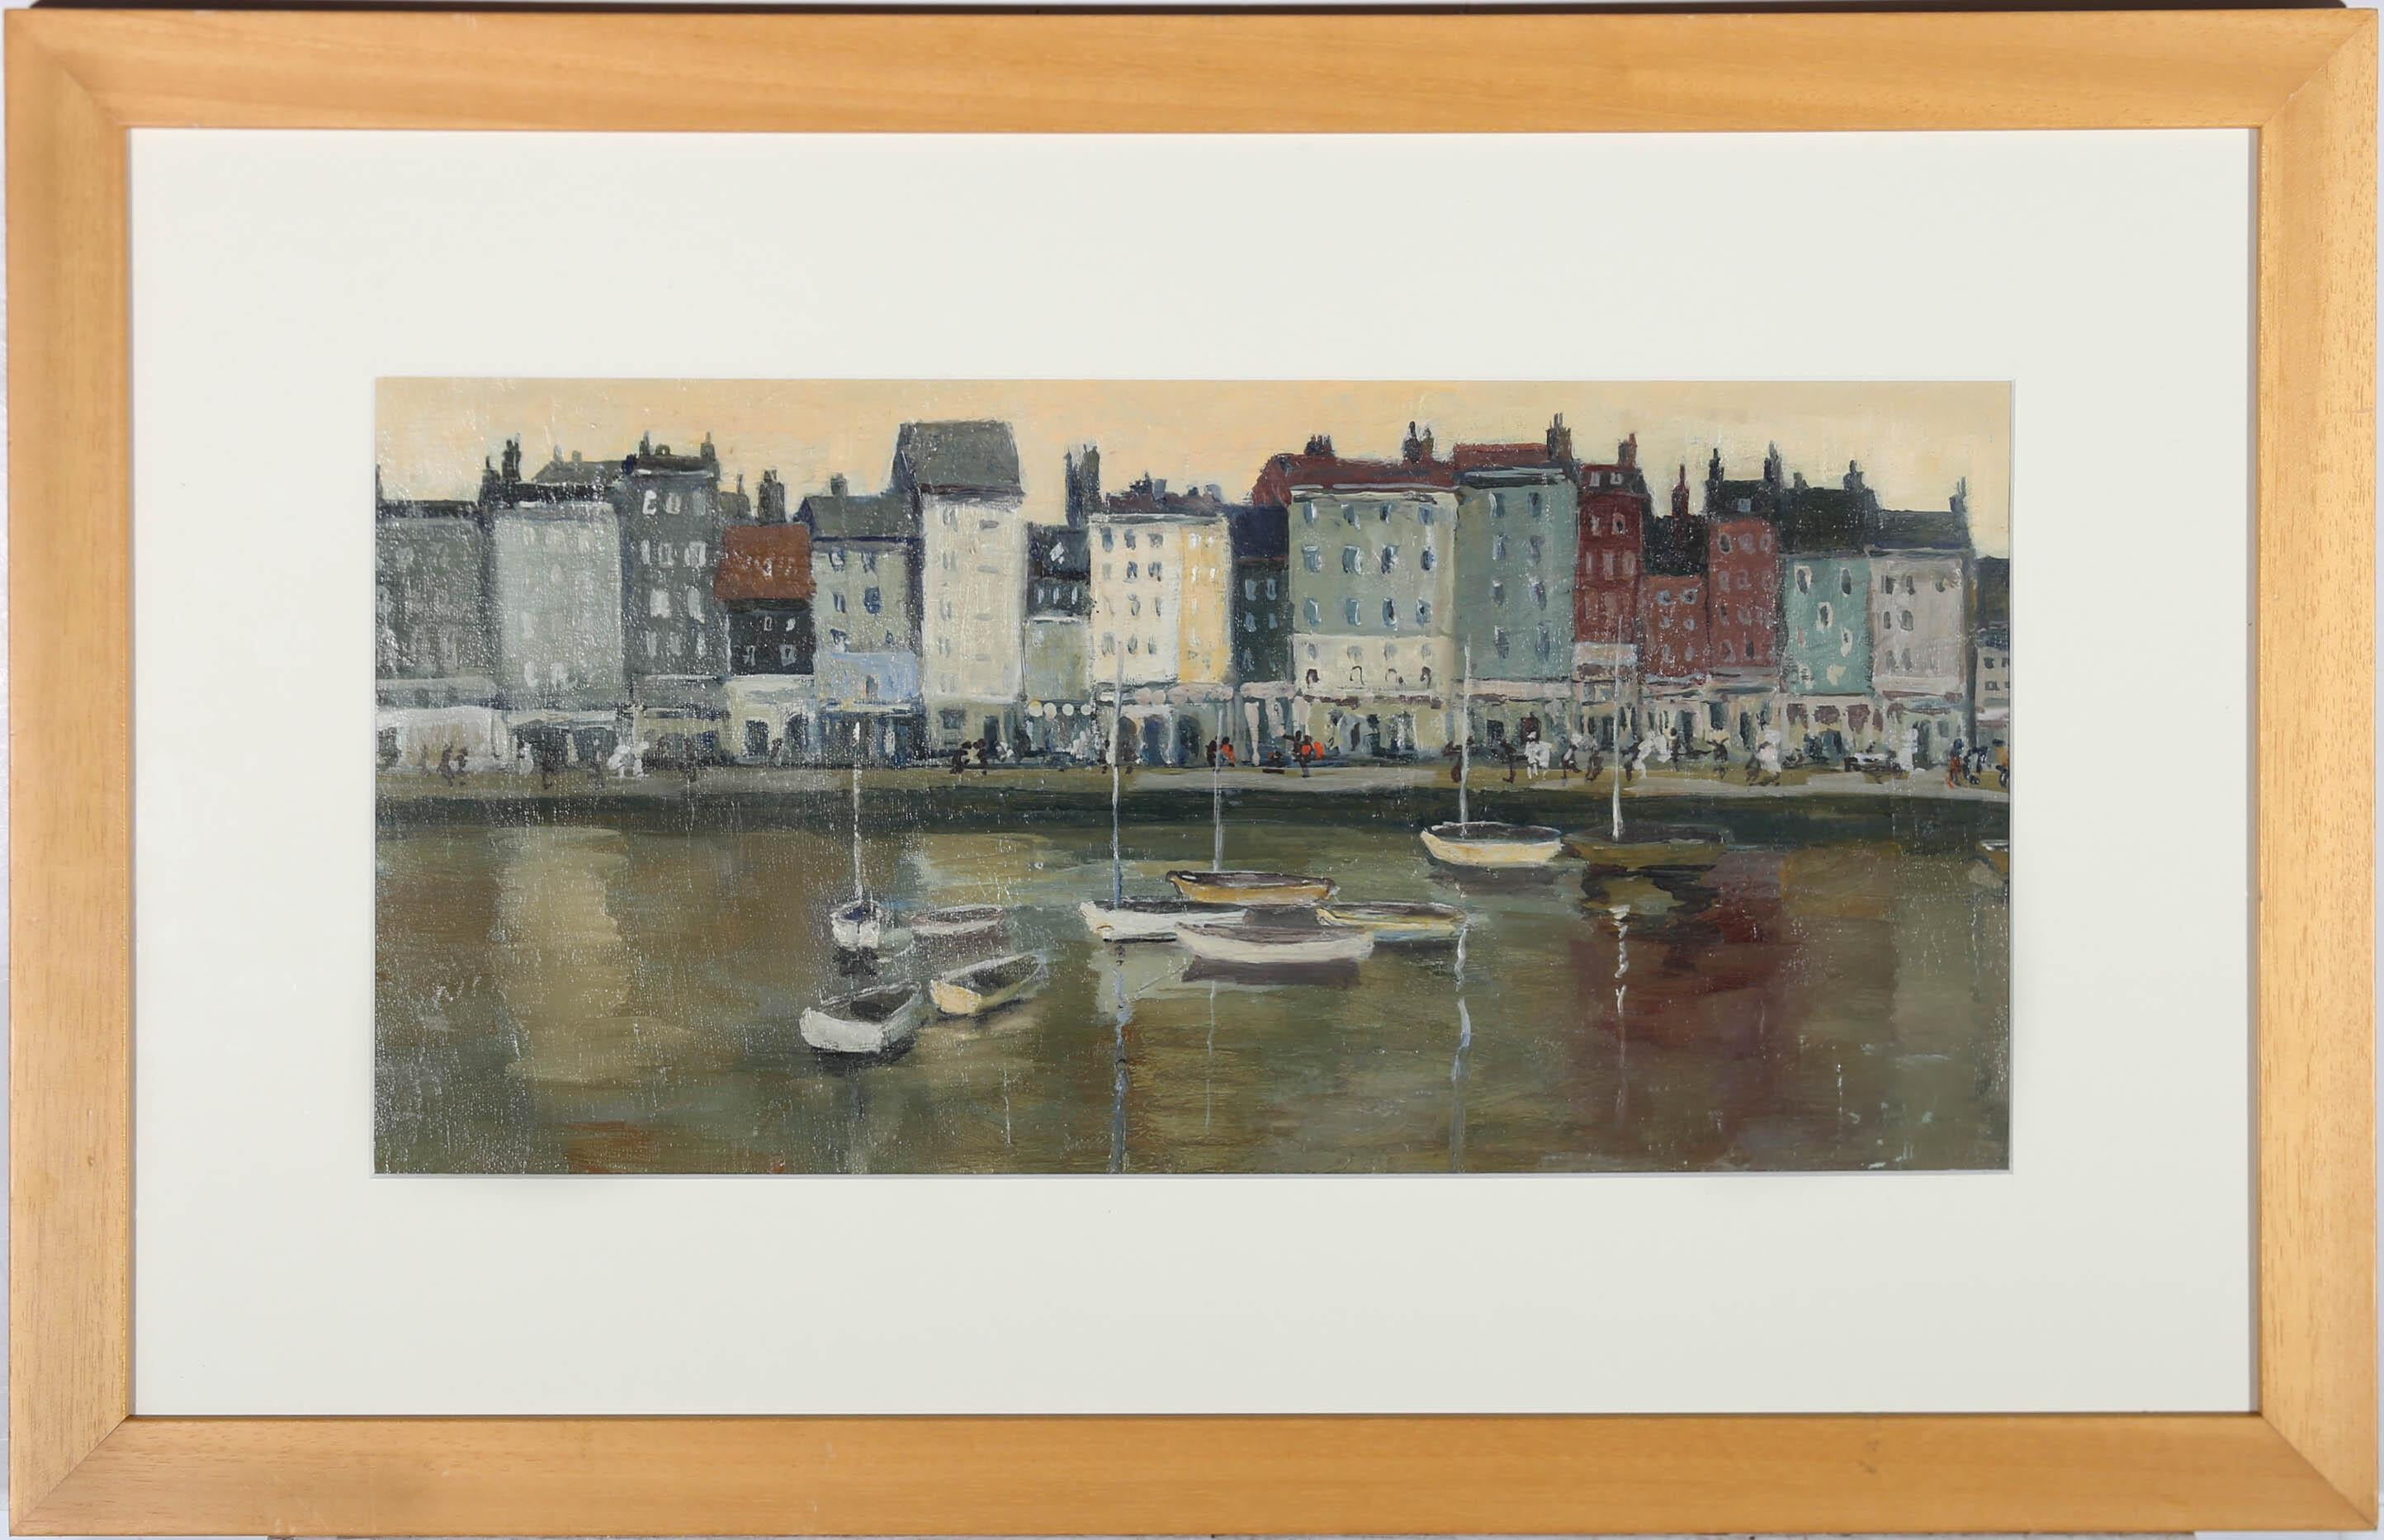 A delightful study of the Vieux-Bassin (old harbour) Honfleur in Normandy, France. Characterized by it's tall 16th- to 18th-century townhouses, the artist captures the historic harbour lined with tourists watching the boats. Unsigned. Presented in a